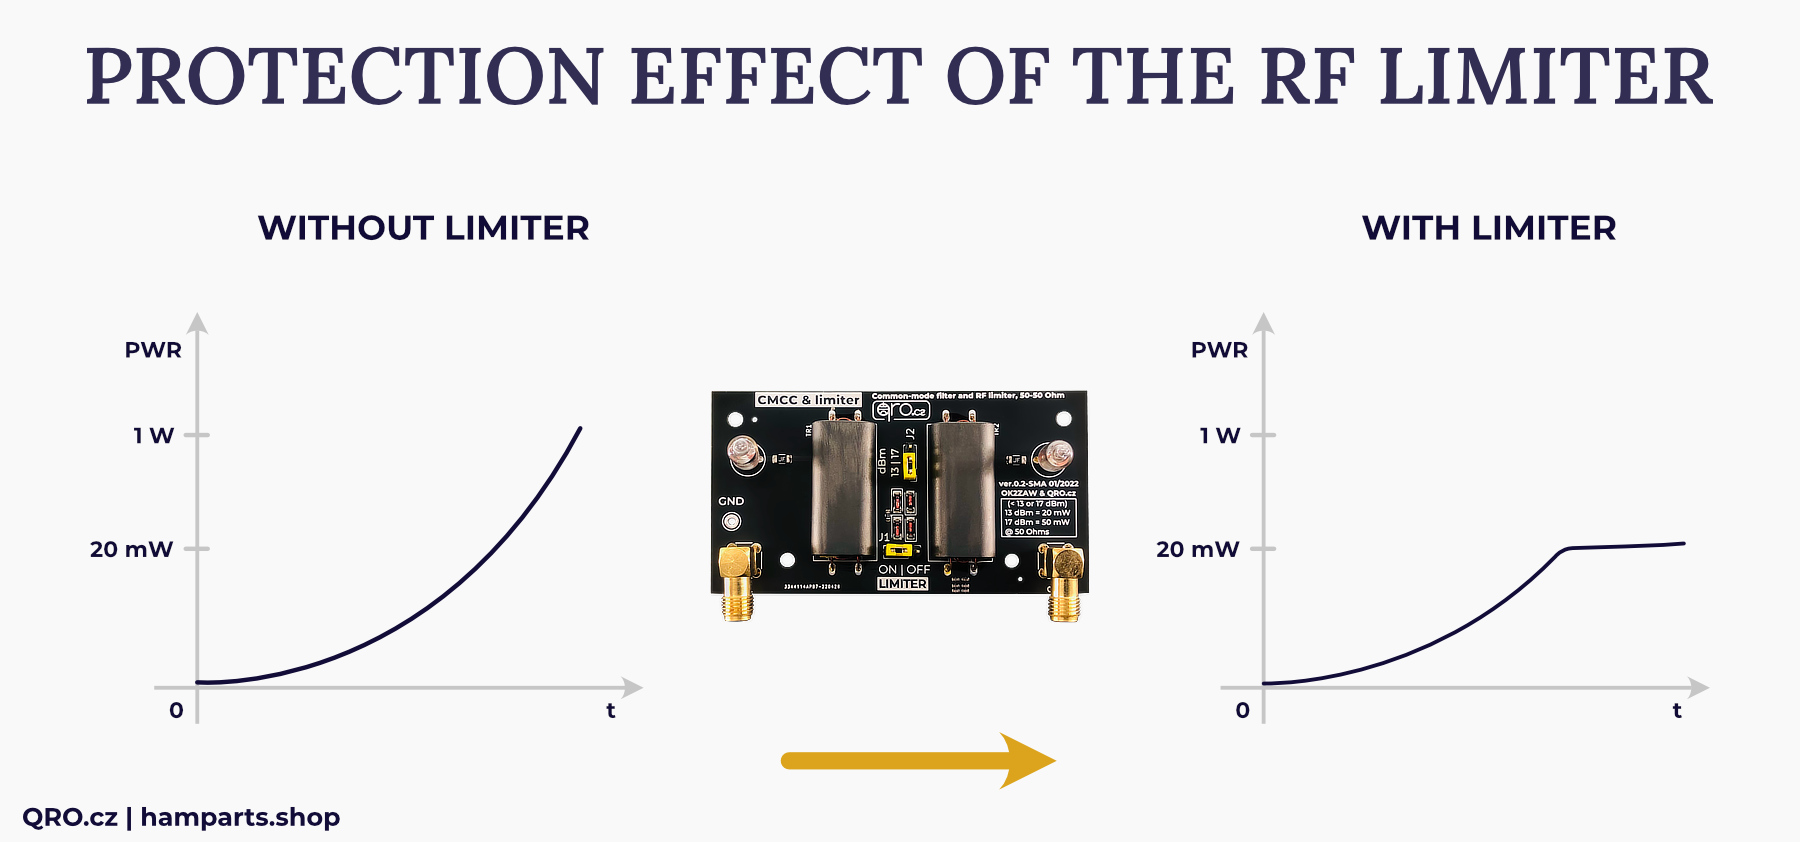 rx protection limiter pcb module effect of the limiter qro.cz hamparts.shop